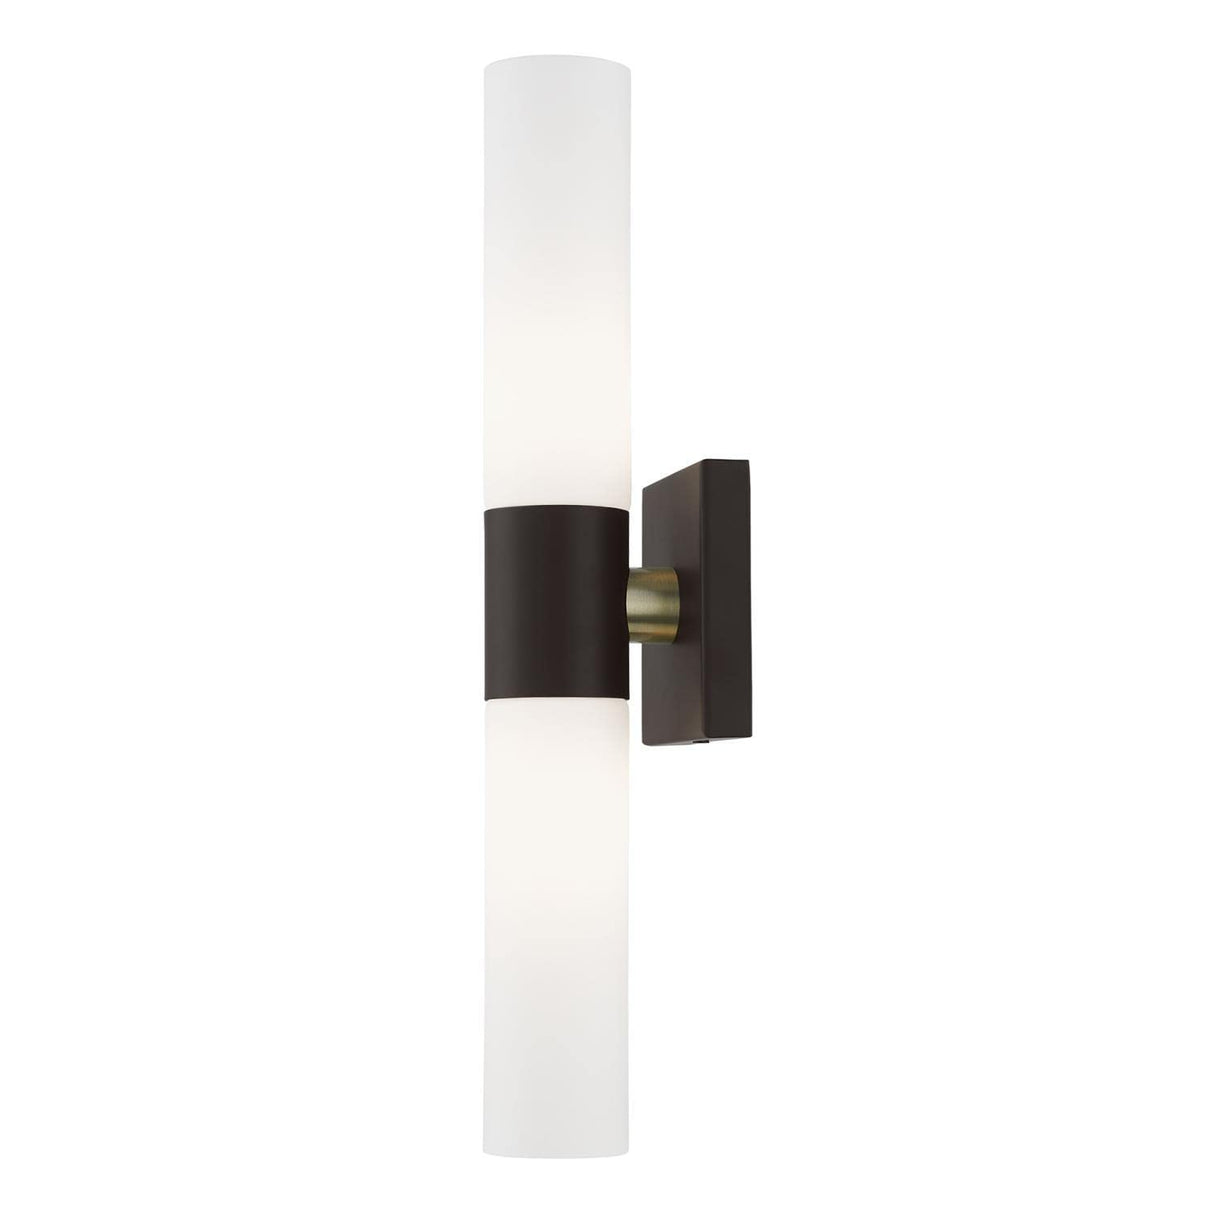 Aero 2 Light Wall Sconce in Bronze with Antique Brass Accent (10102-07)